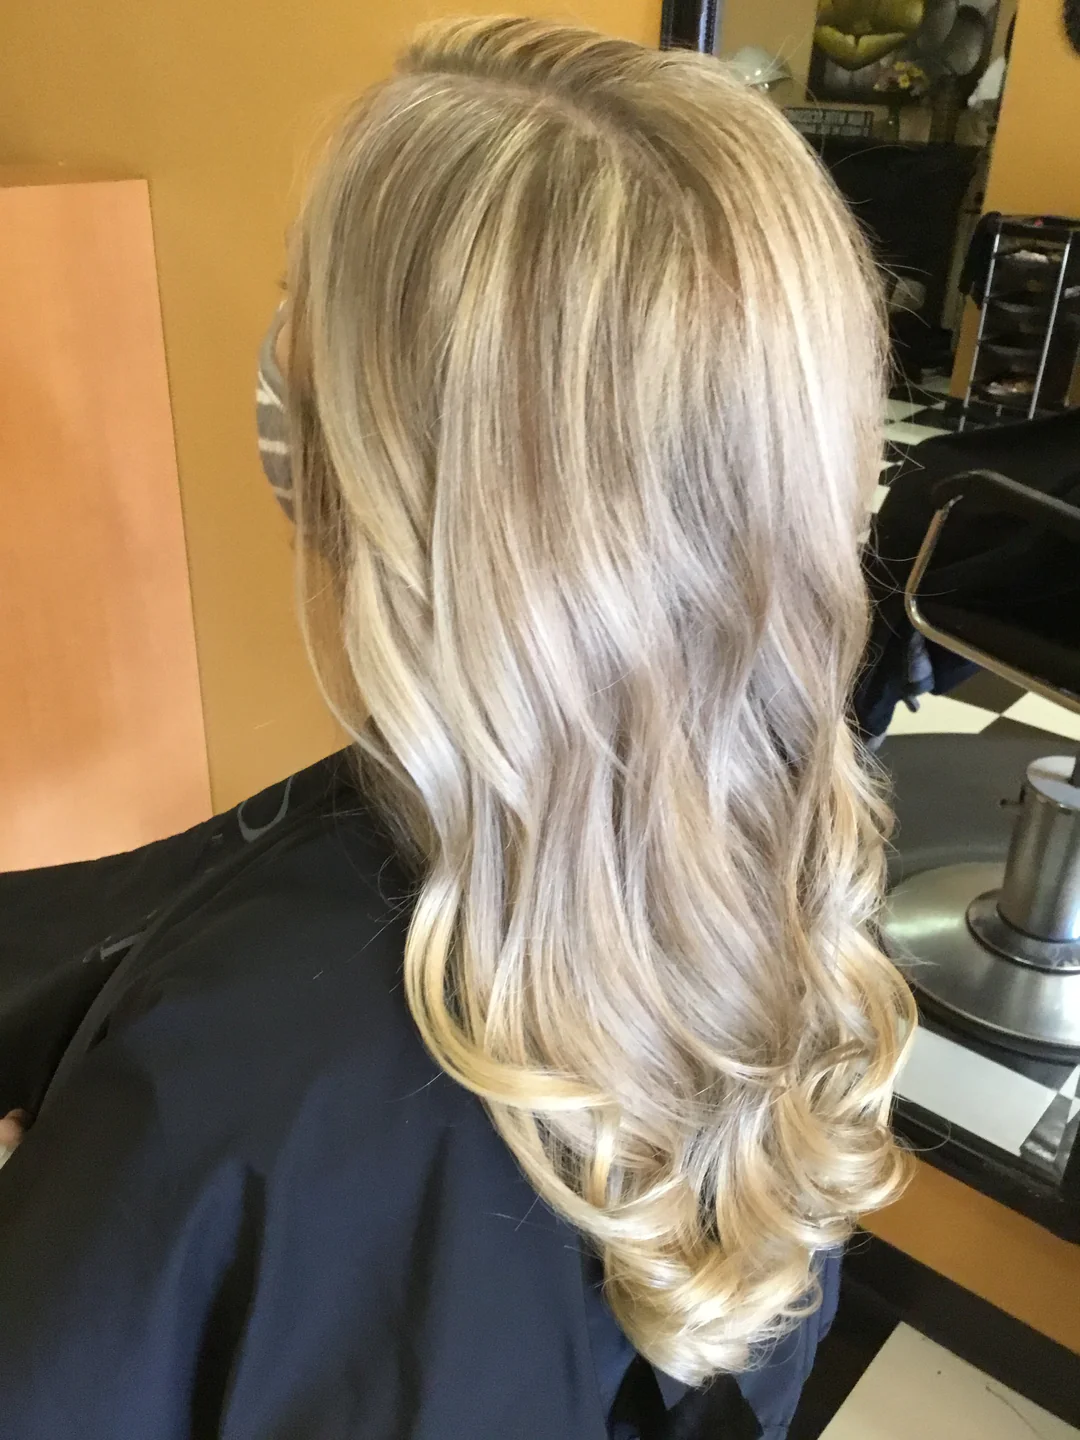 Long Blonde Foiled Highlights Colouring with Natural Curls Cut & Style